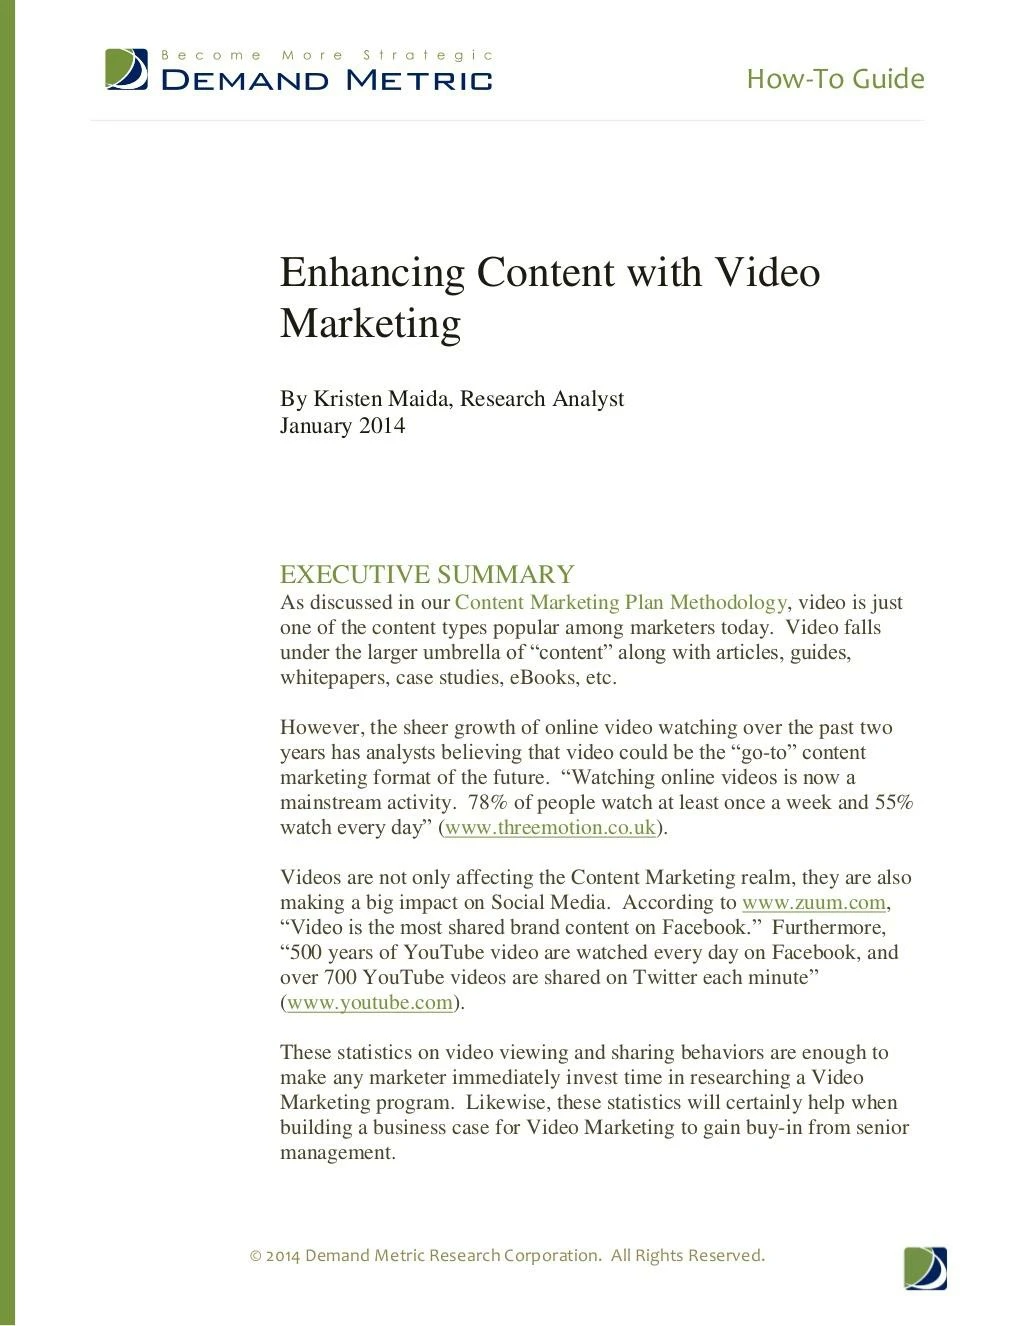 enhancing content with video marketing